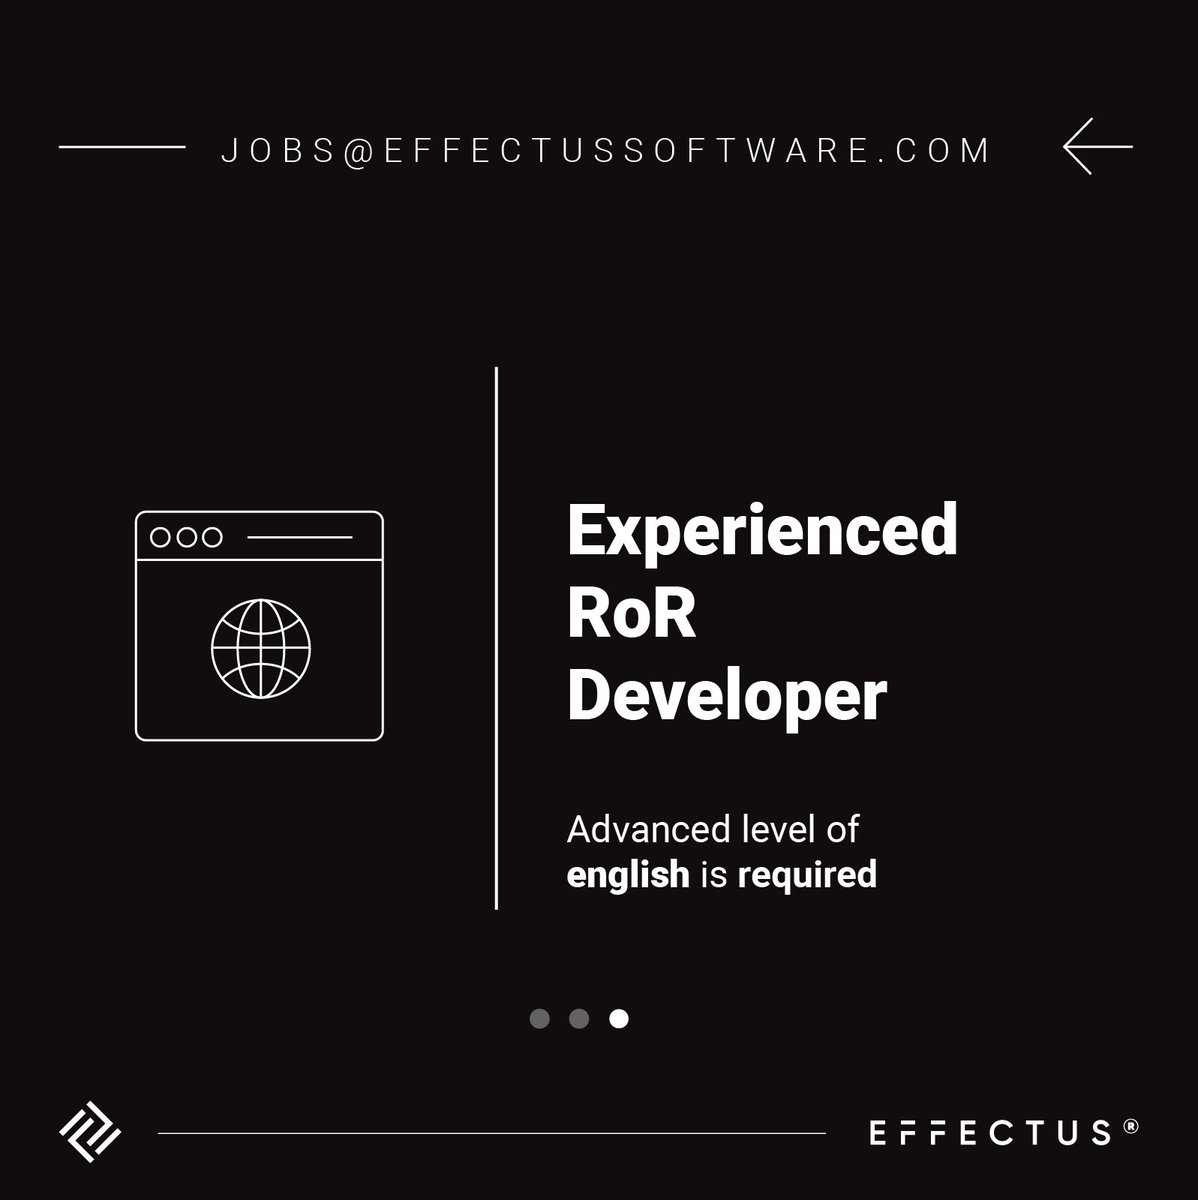 Would YOU like to be PART of our TEAM? 🌎 Positions available: -Experienced React Js or React Native Developer -Experienced RoR developer 📝 Feel free to send us your CV to jobs@effectussoftware.com! #job #jobs #nowhiring #jobsearch #joinourteam #jobhunting #jobopportunity